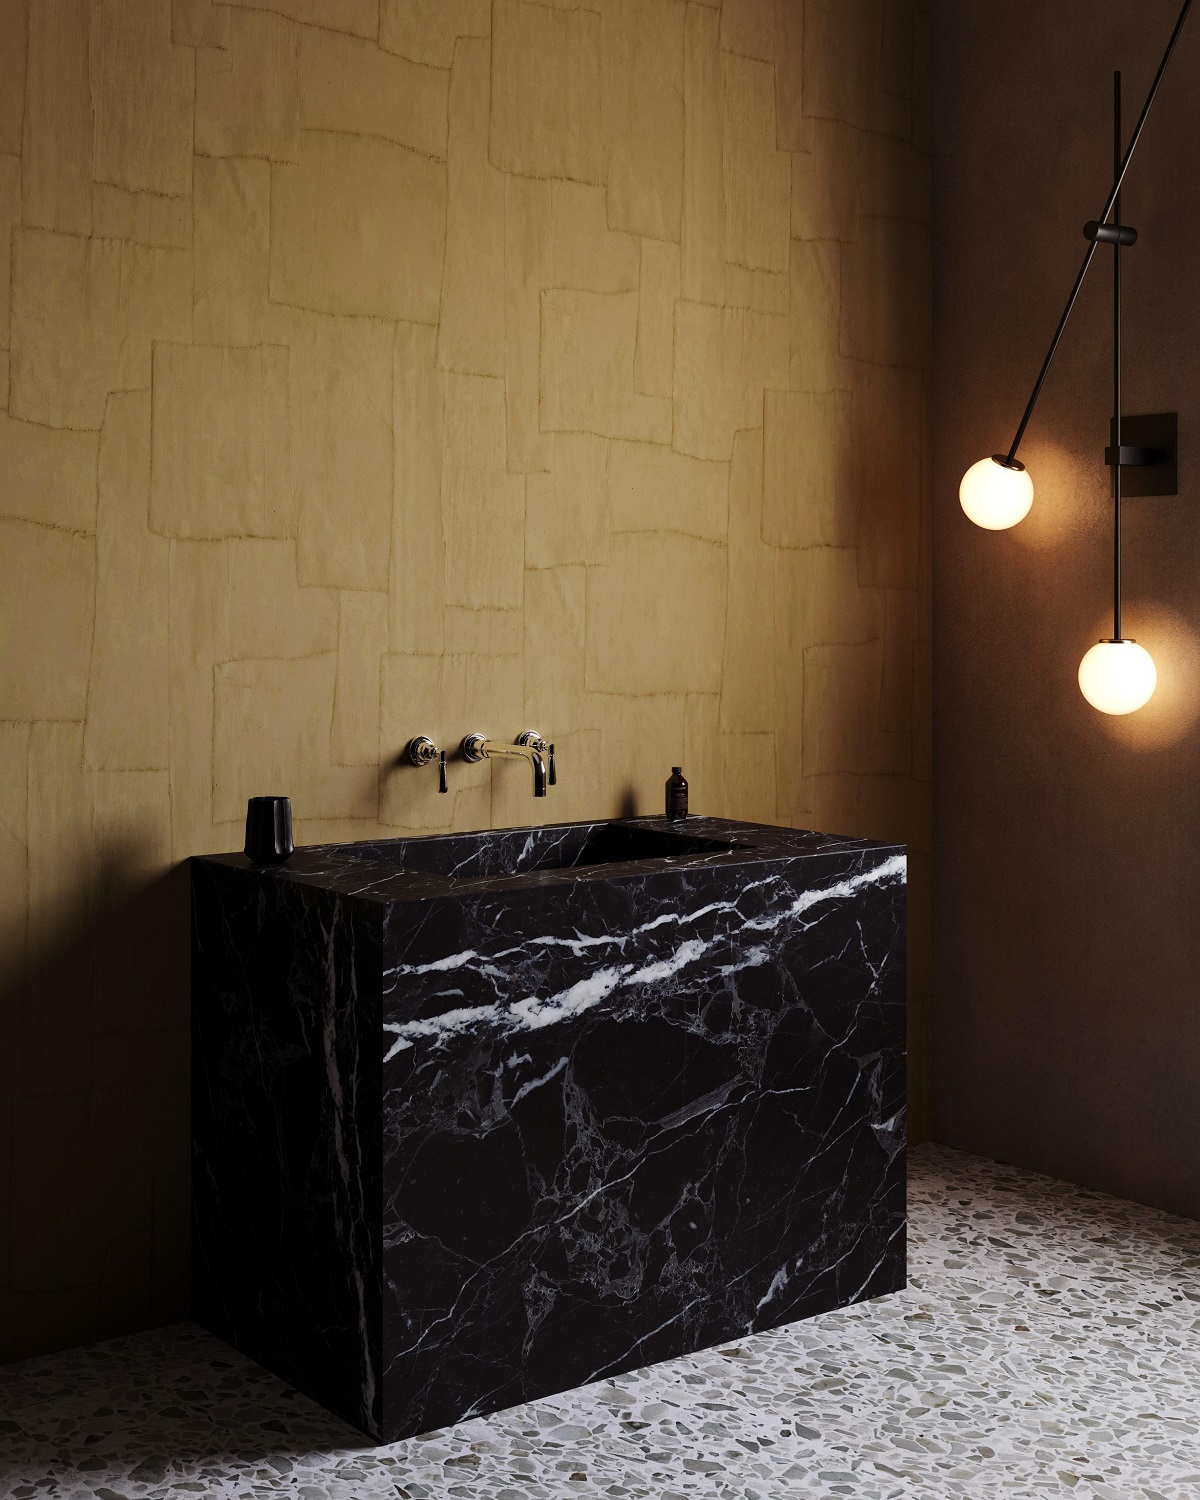 ochre arte wallcovering with black marble surfaces in a bathroom design